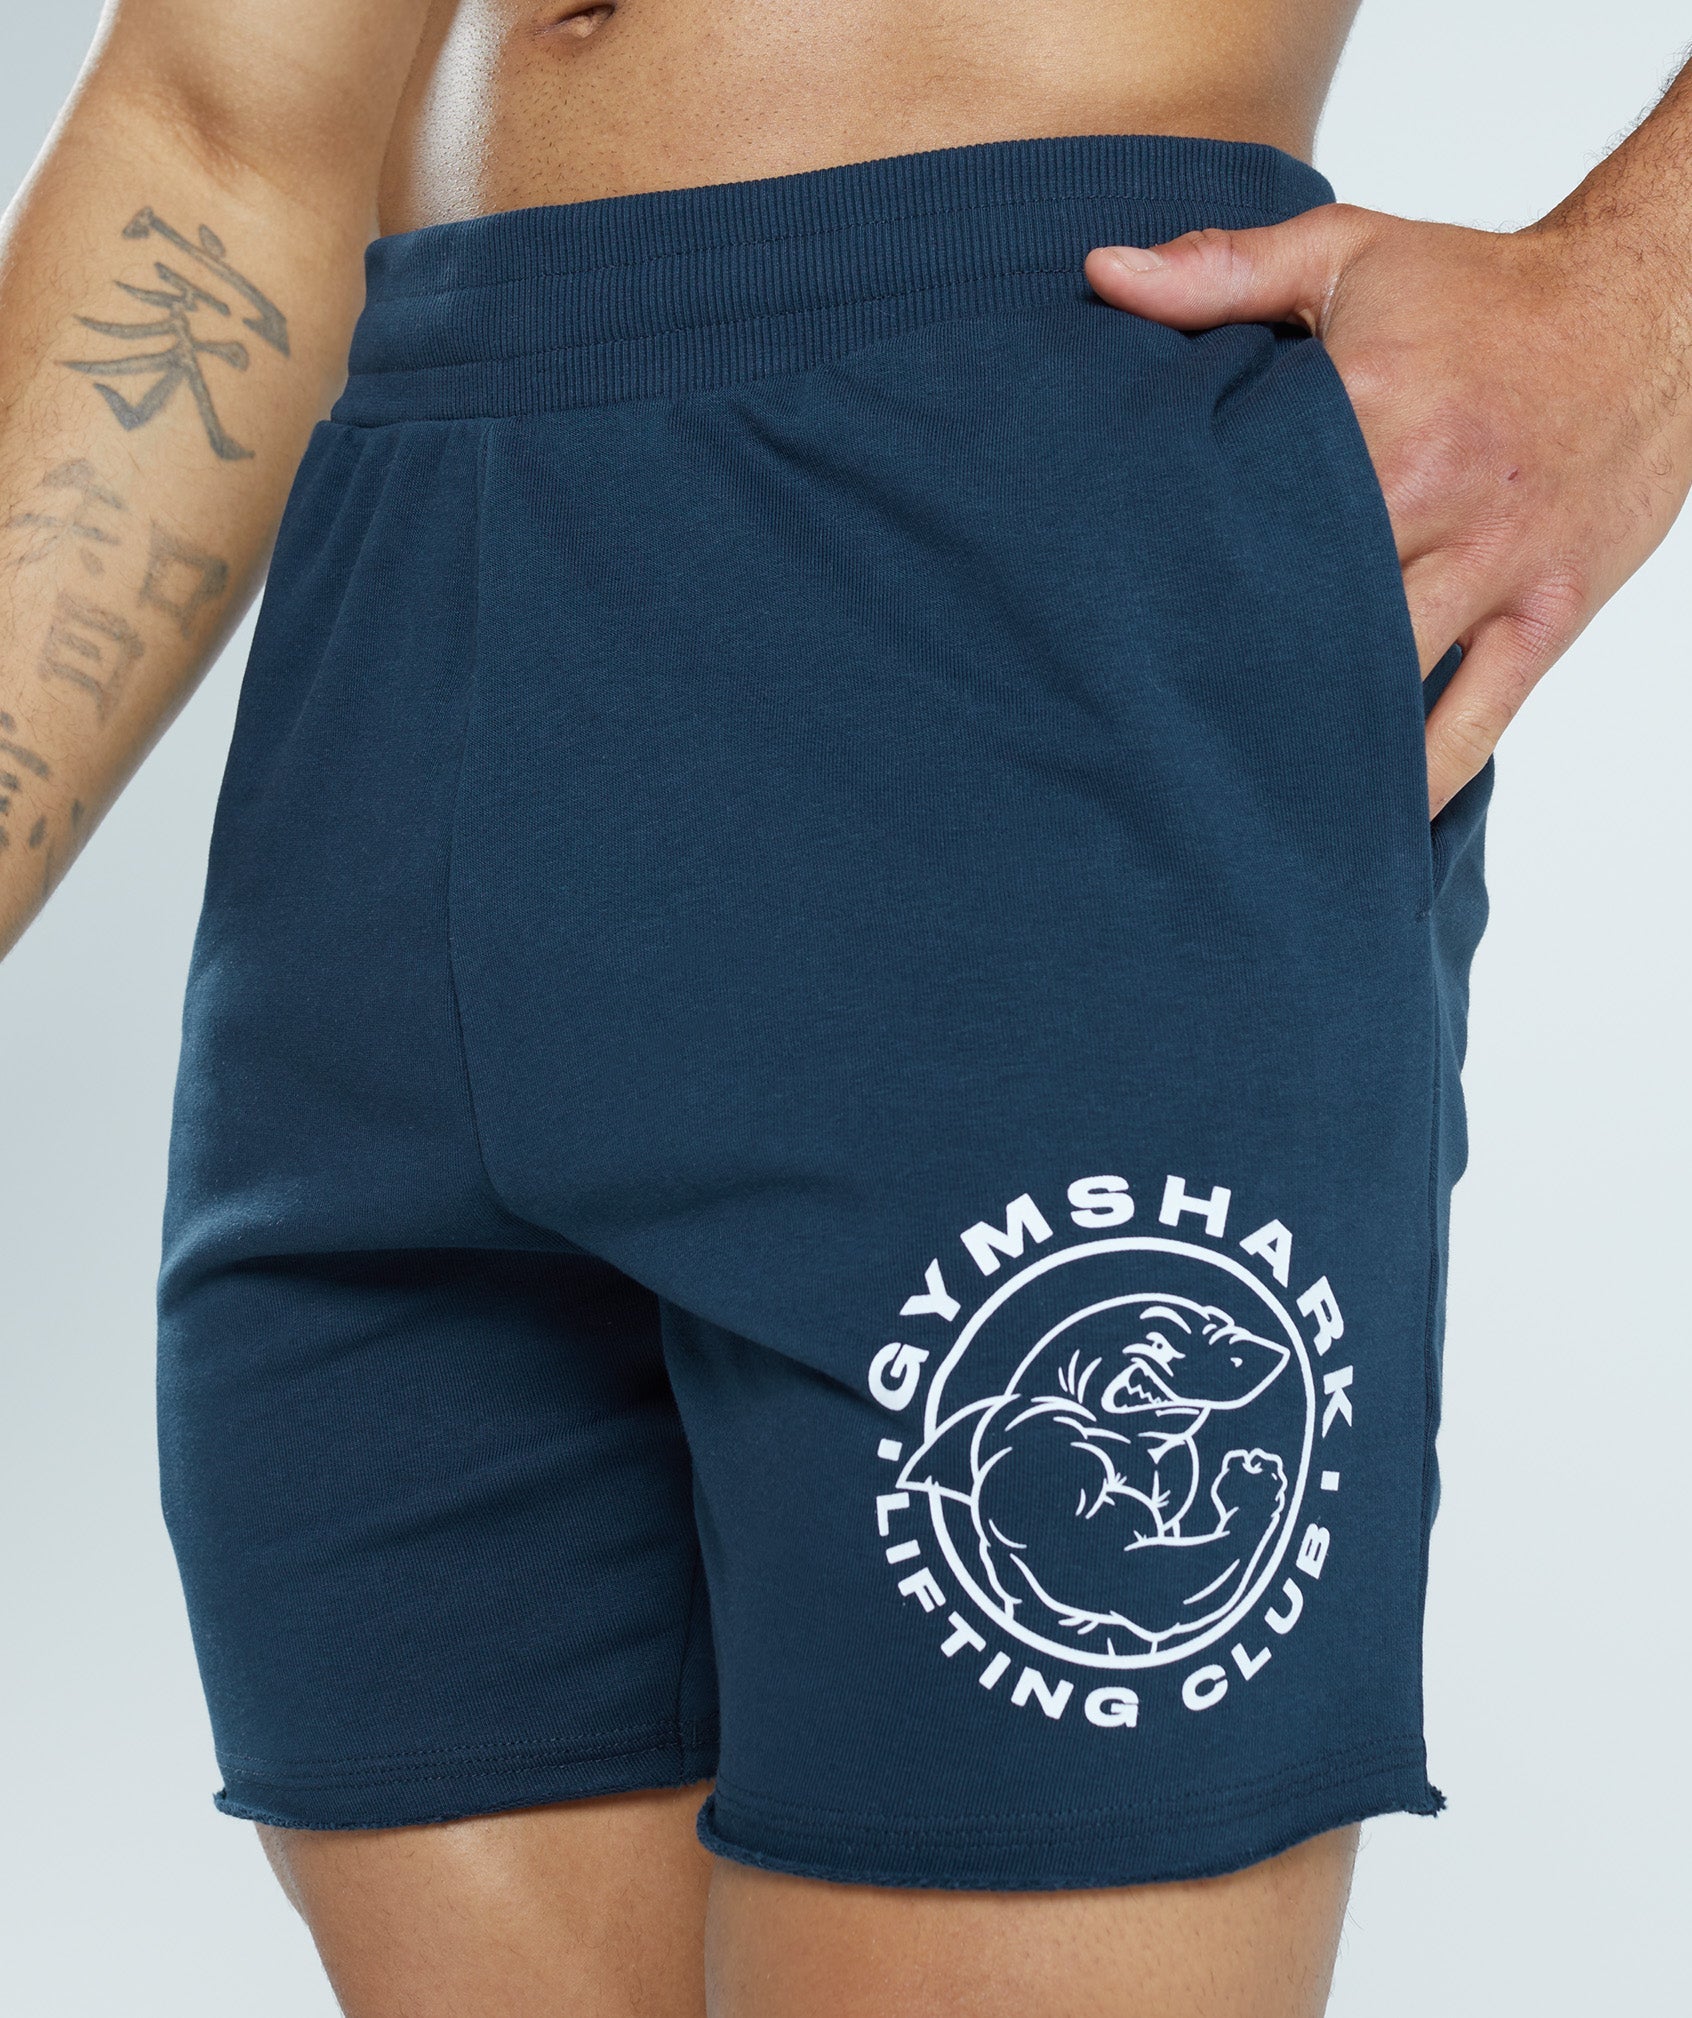 Legacy Shorts in Navy - view 5